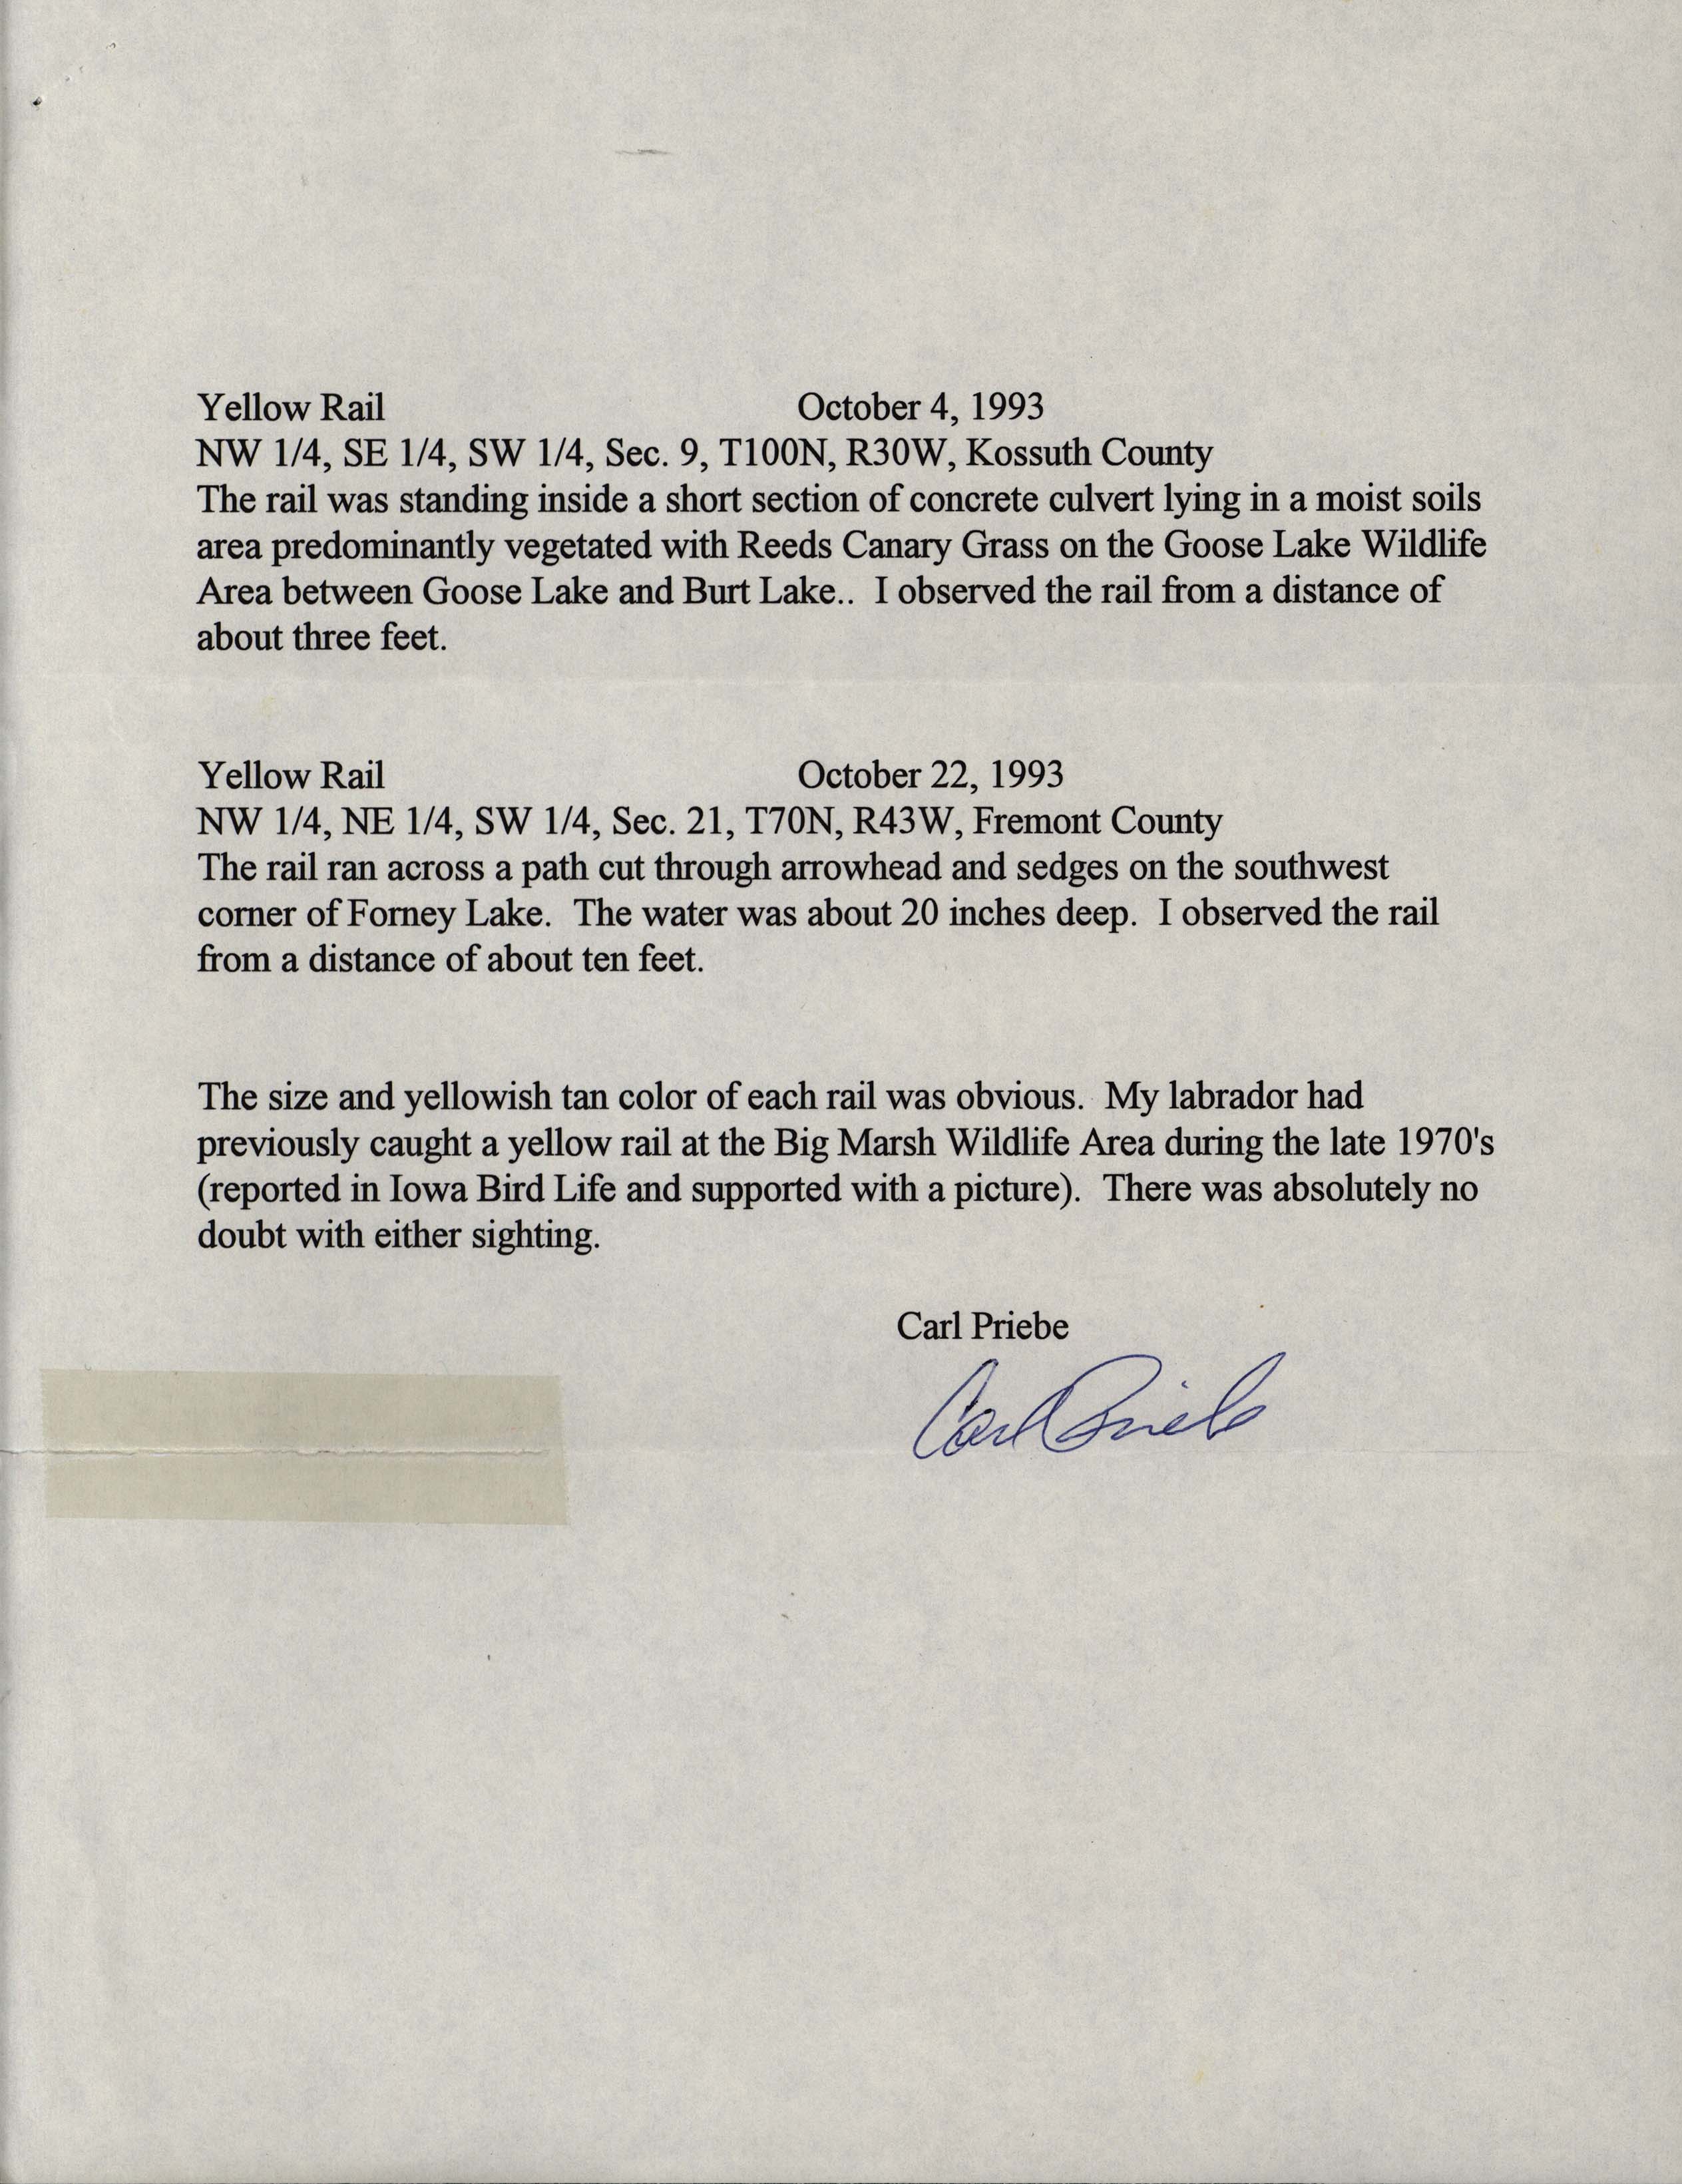 Field notes about Yellow Rail sightings contributed by Carl Priebe, fall 1993